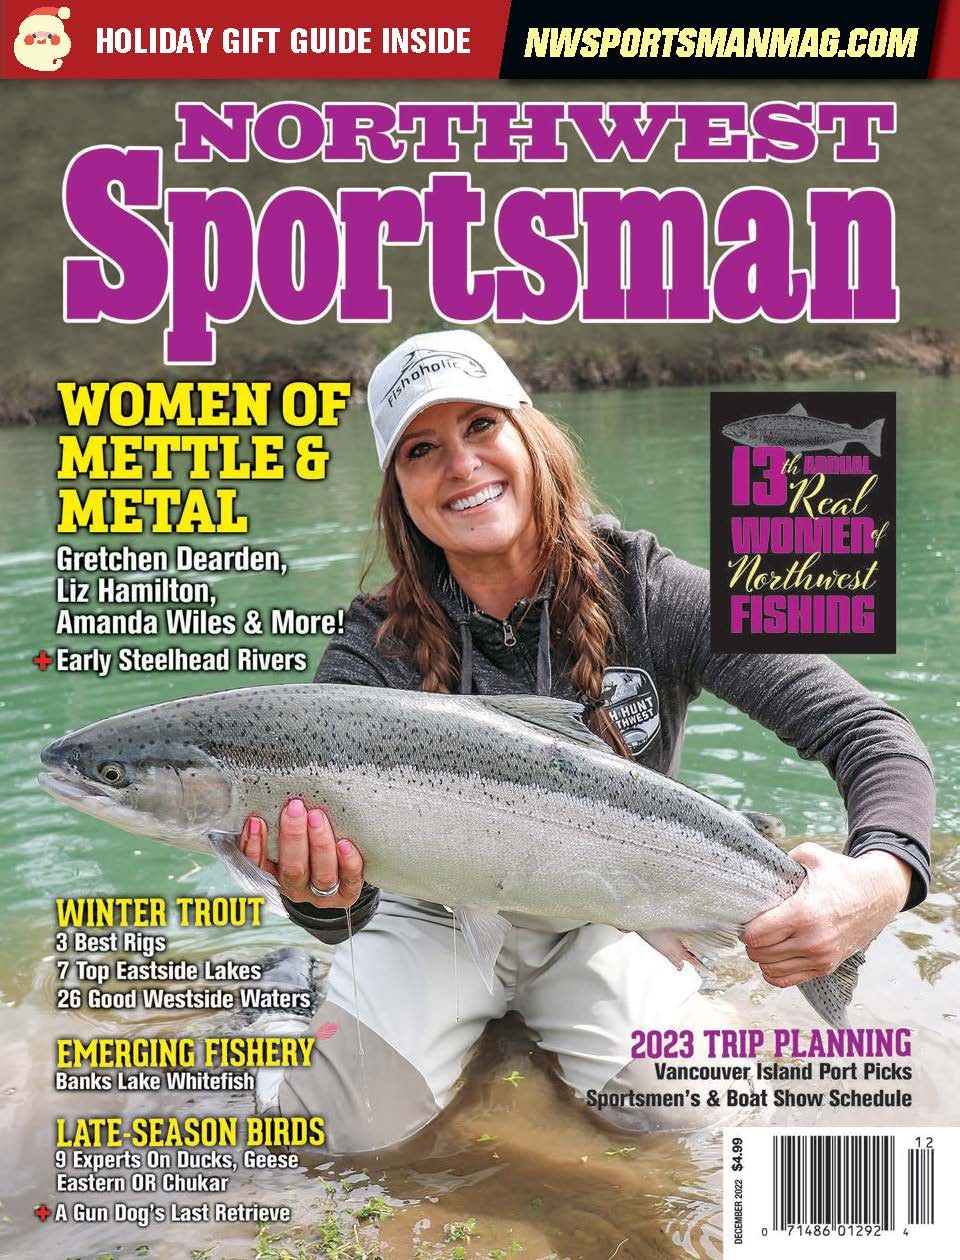 Woman holding a fish on the cover of Northwest Sportsman magazine